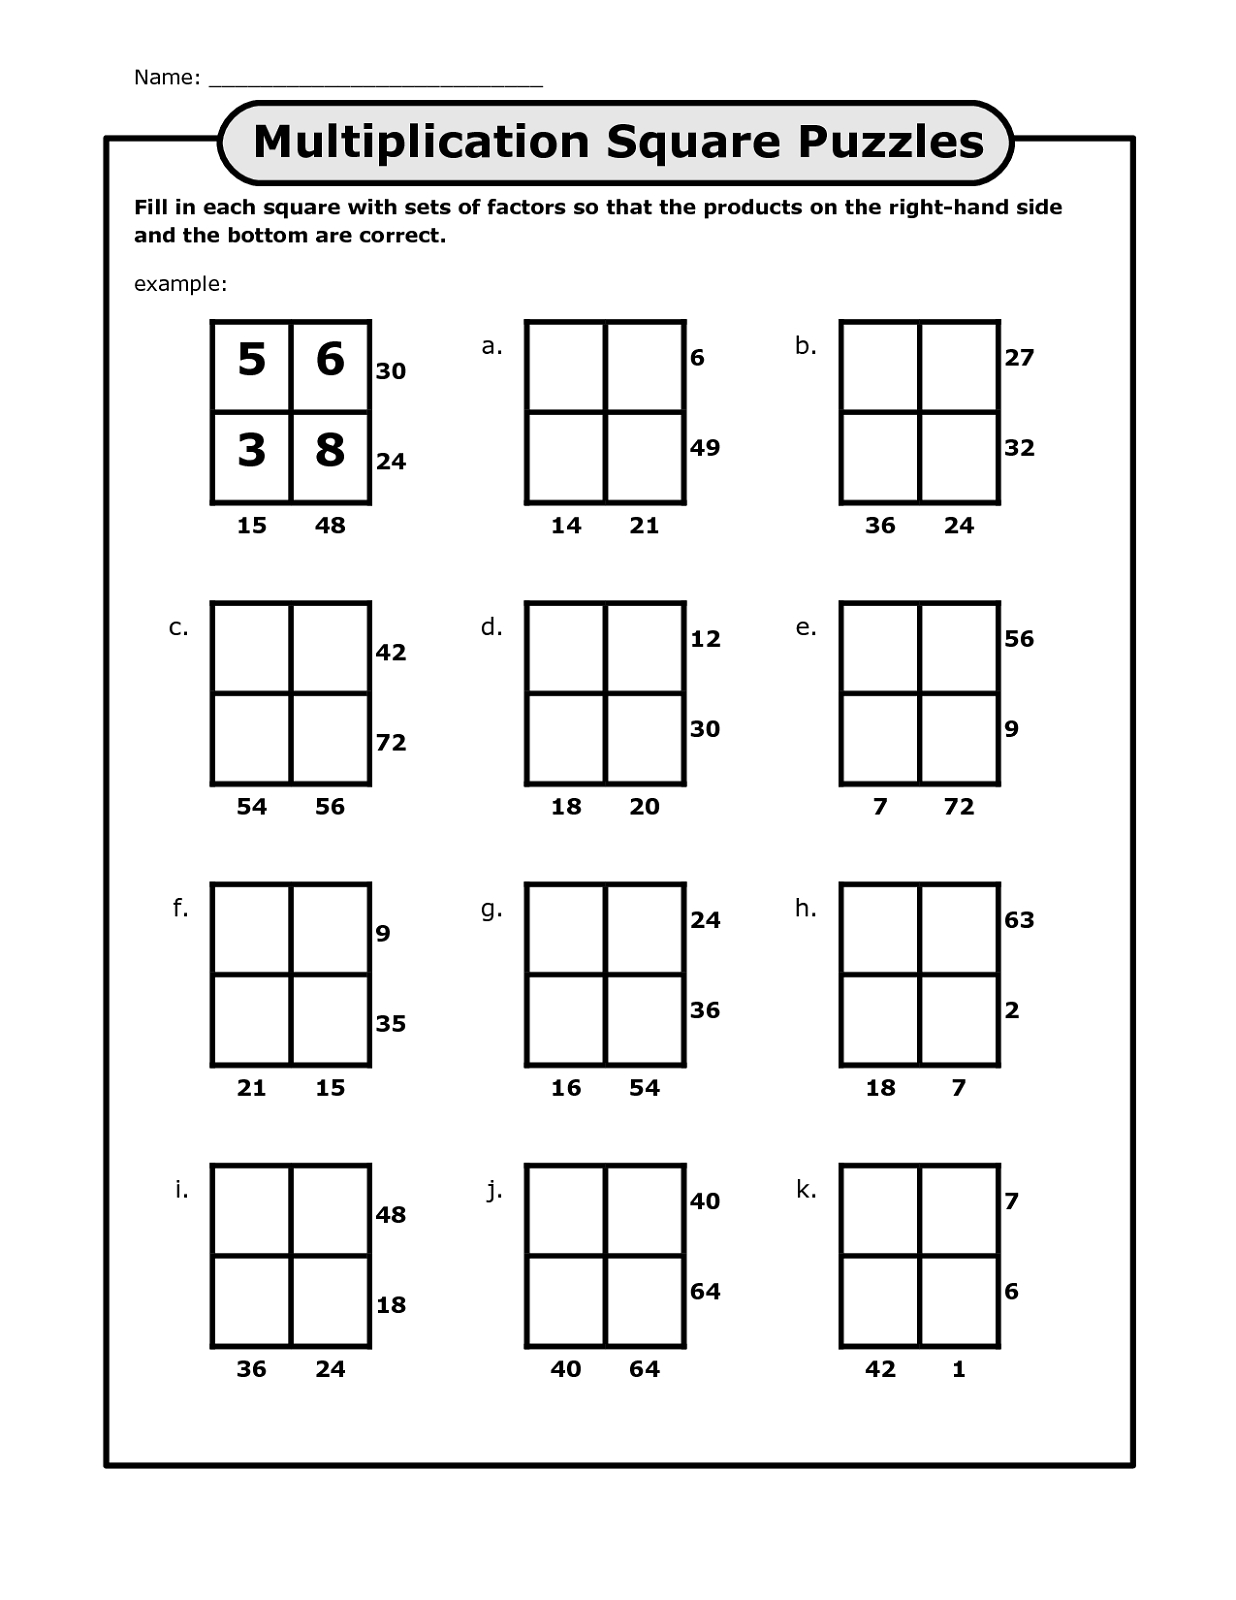 Math Puzzles Printable For Learning | Activity Shelter - Printable Multiplication Puzzles